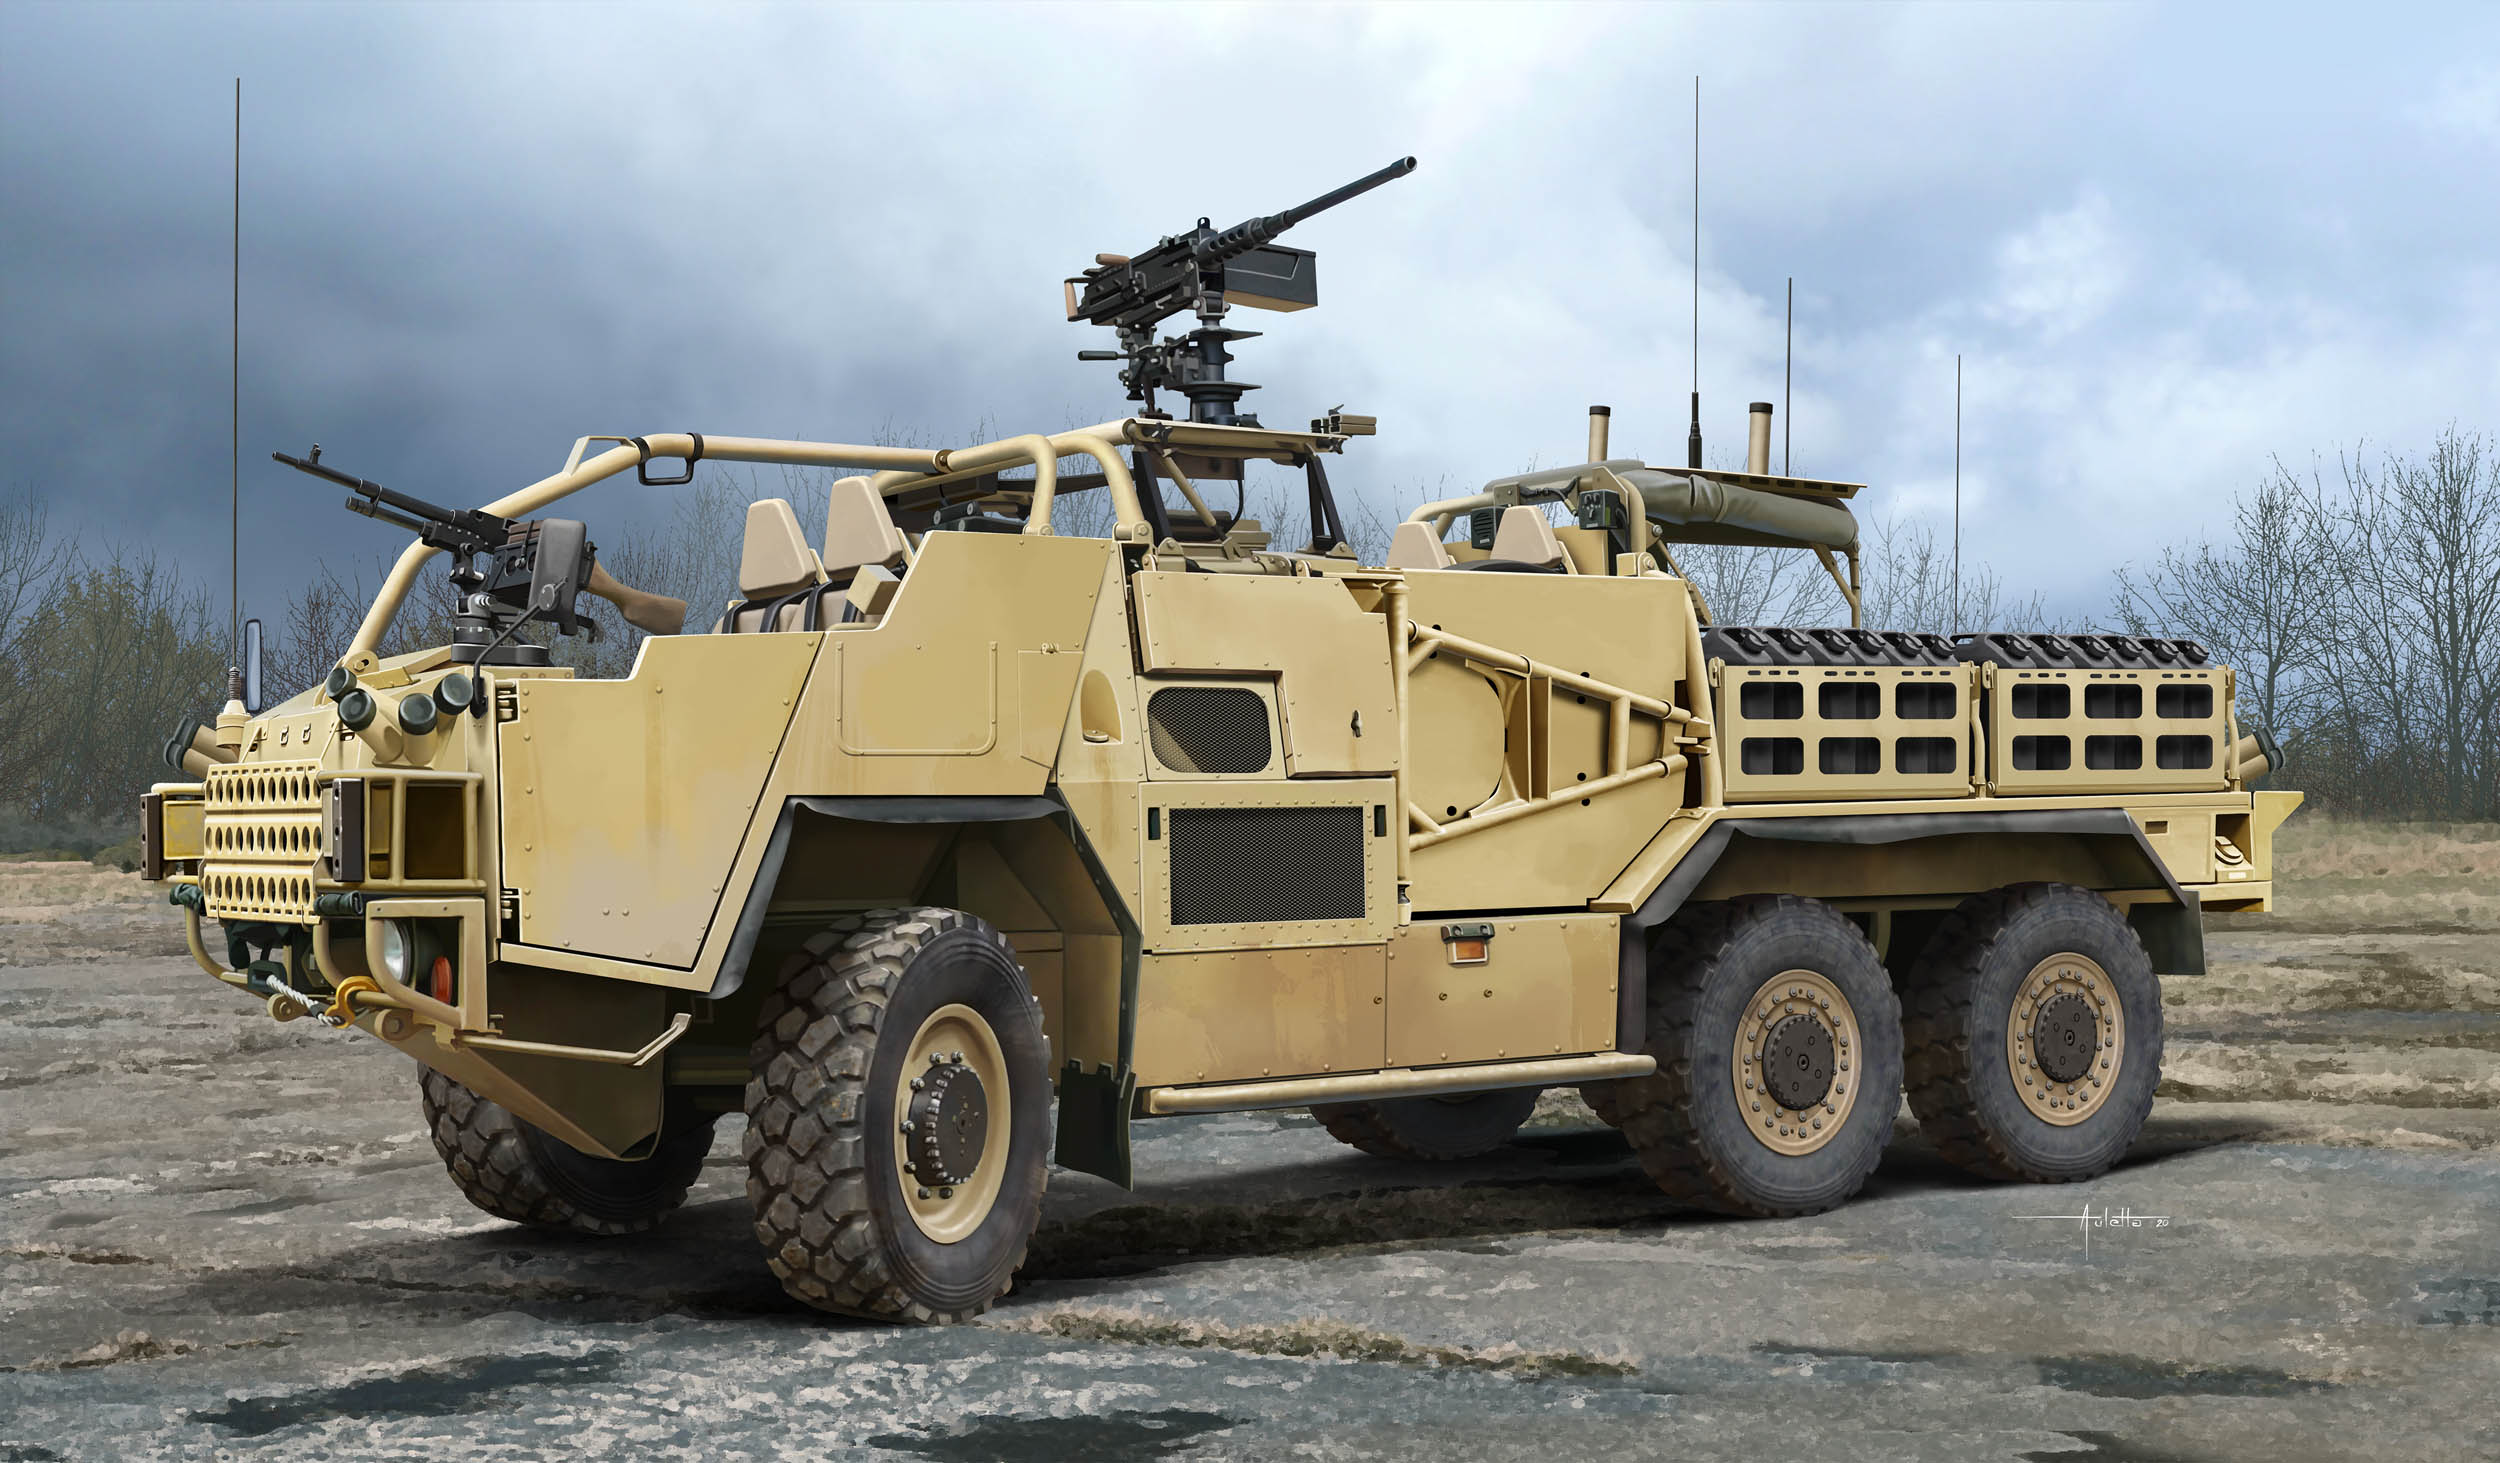 Coyote TSV (Tactical Support Vehicle)